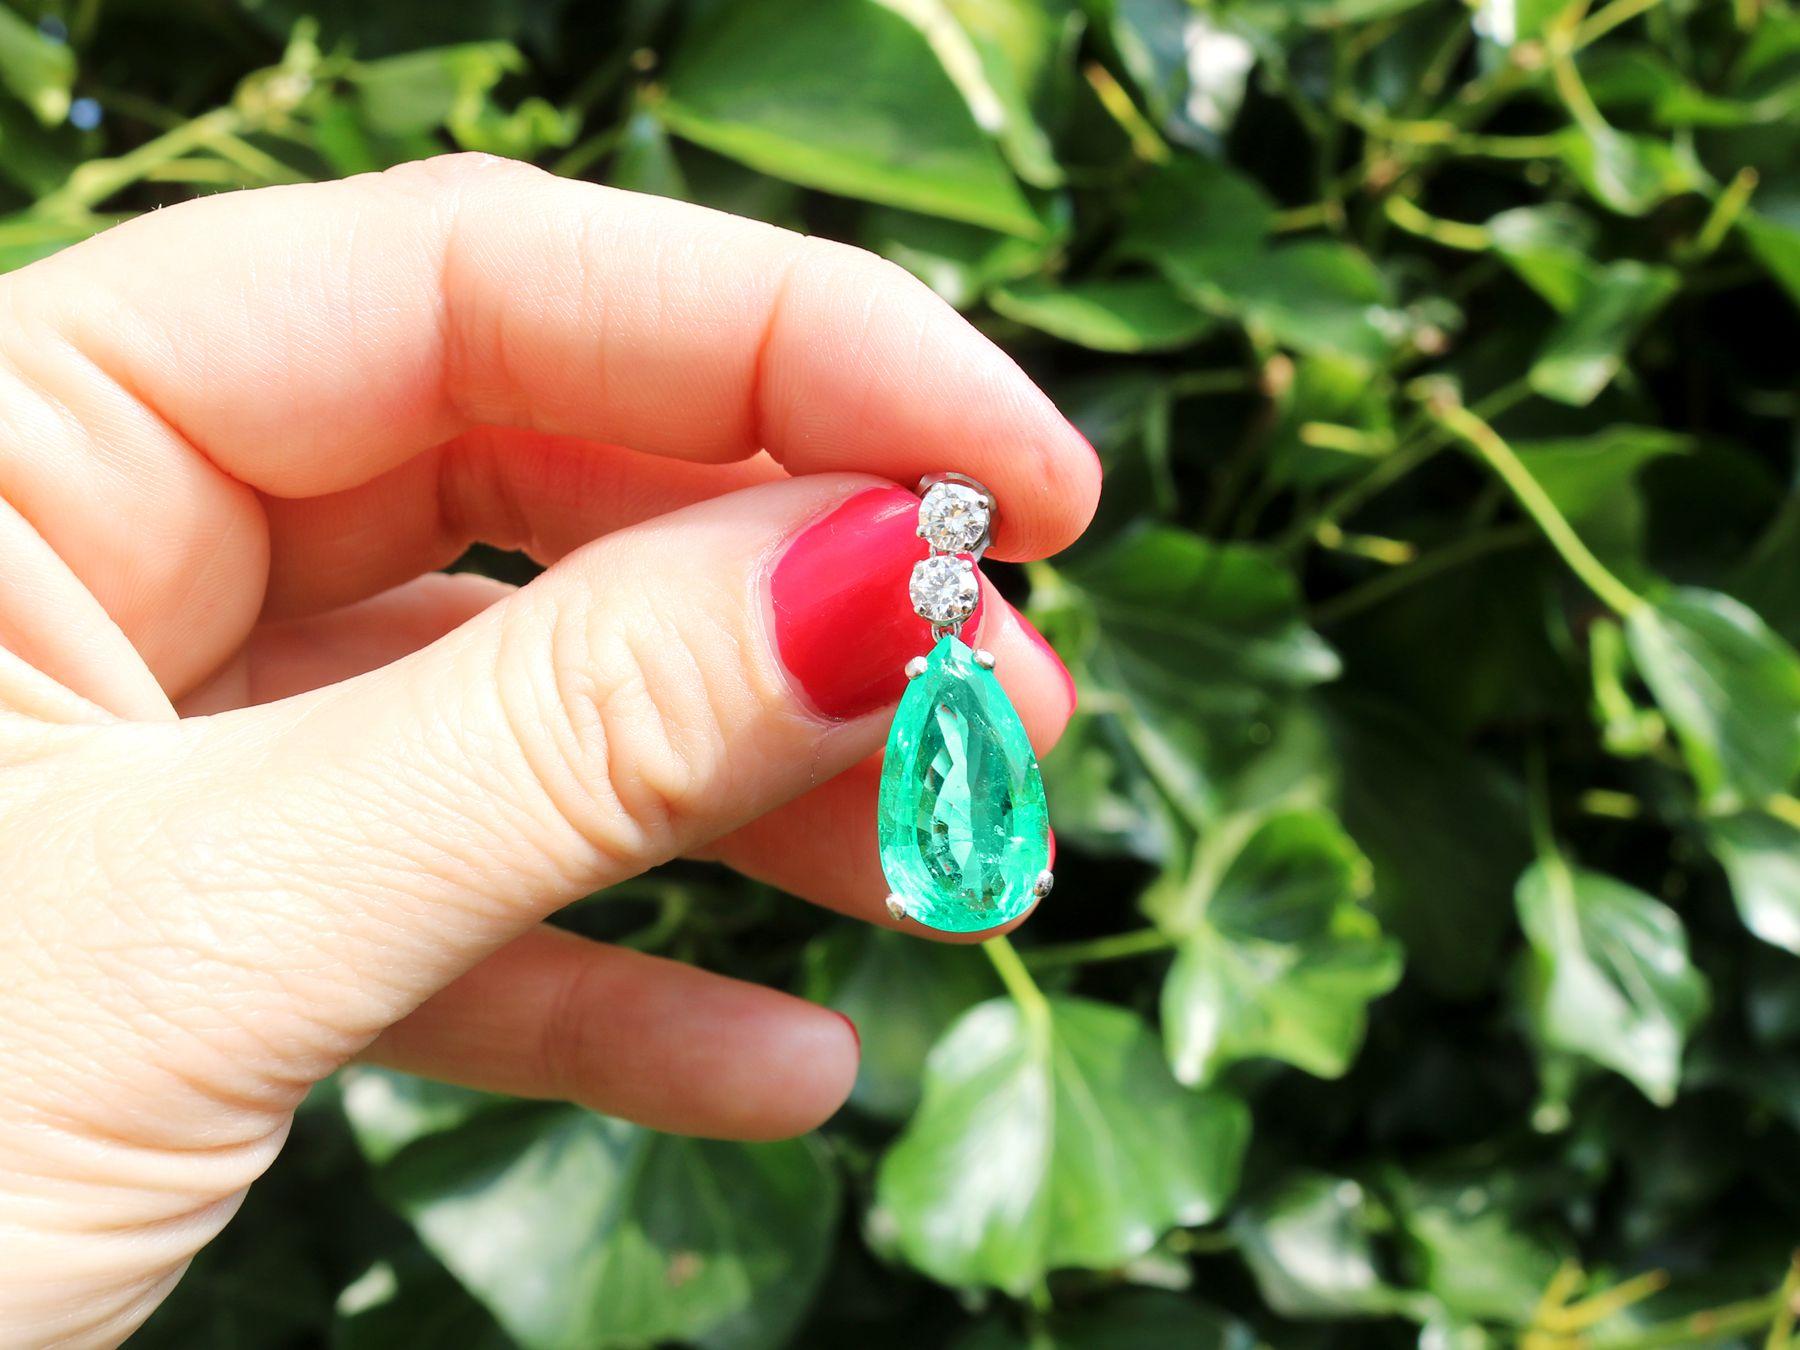 A stunning, fine and impressive pair of vintage 15.51 carat Colombian emerald and 1.12 carat diamond, platinum drop earrings; part of our diverse emerald jewellery collections

These stunning vintage emerald earrings have been crafted in